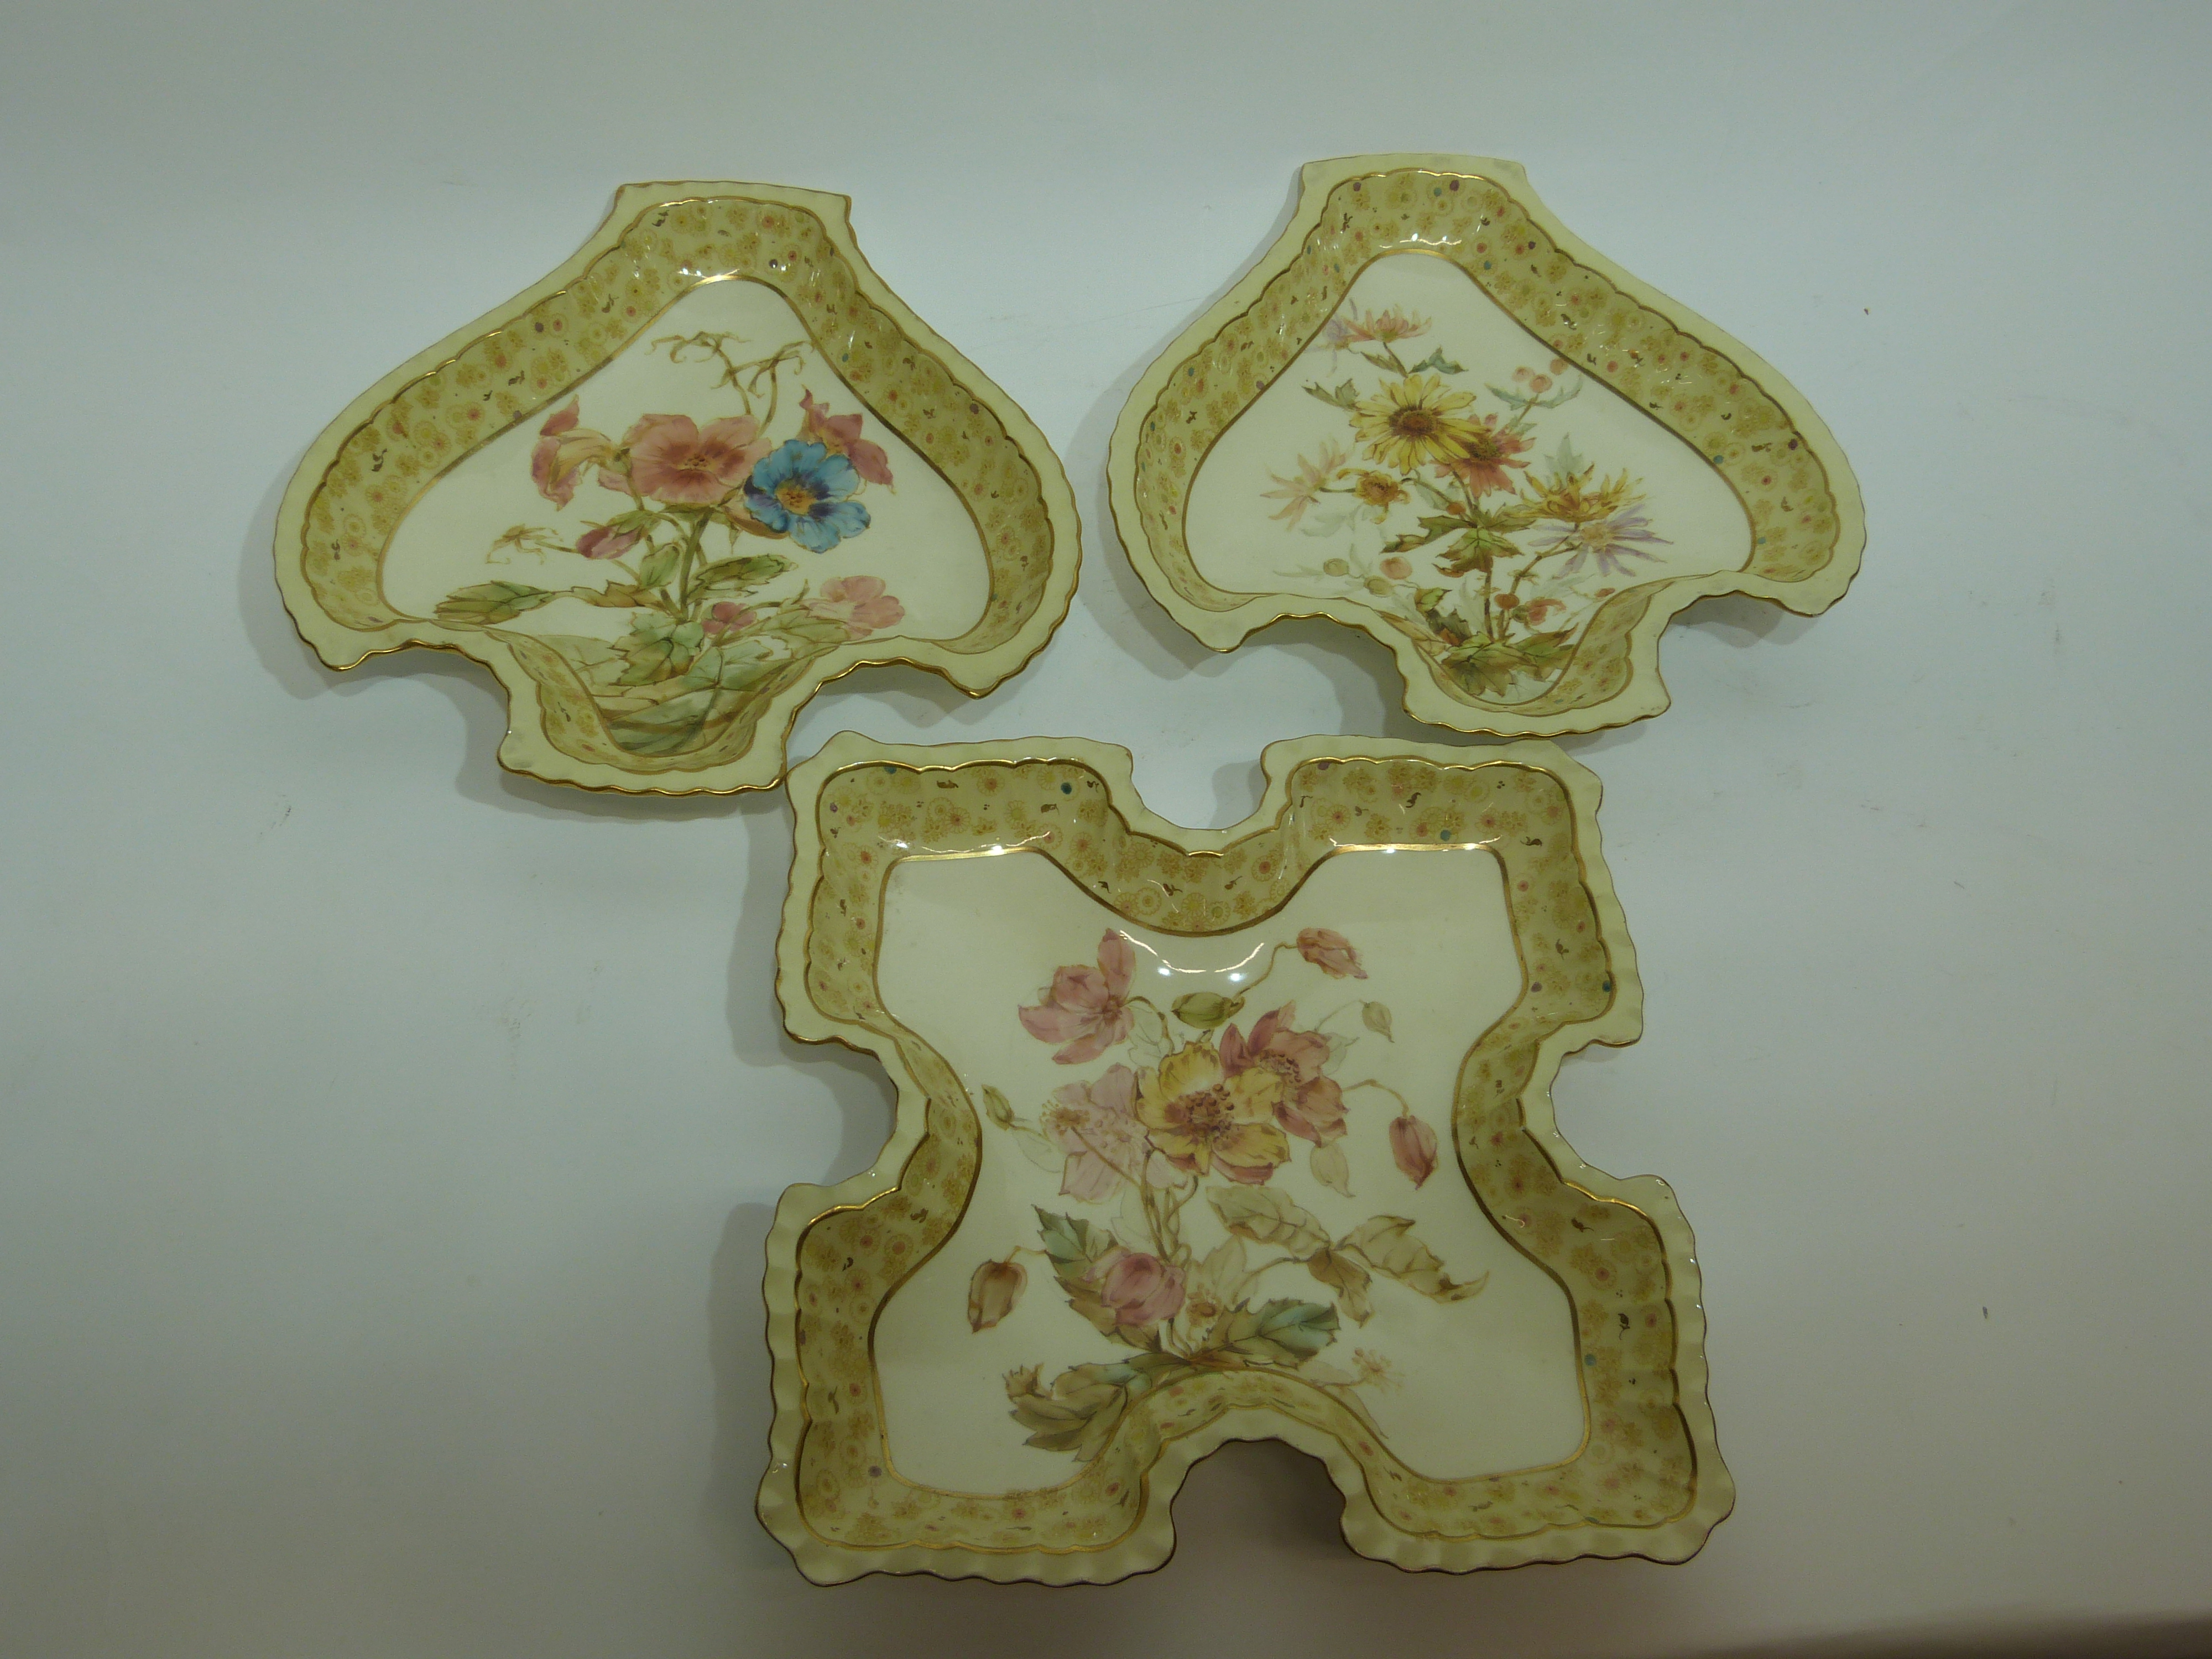 Group of three Royal Crown Derby dishes in the Harrow pattern, all with shaped borders with floral